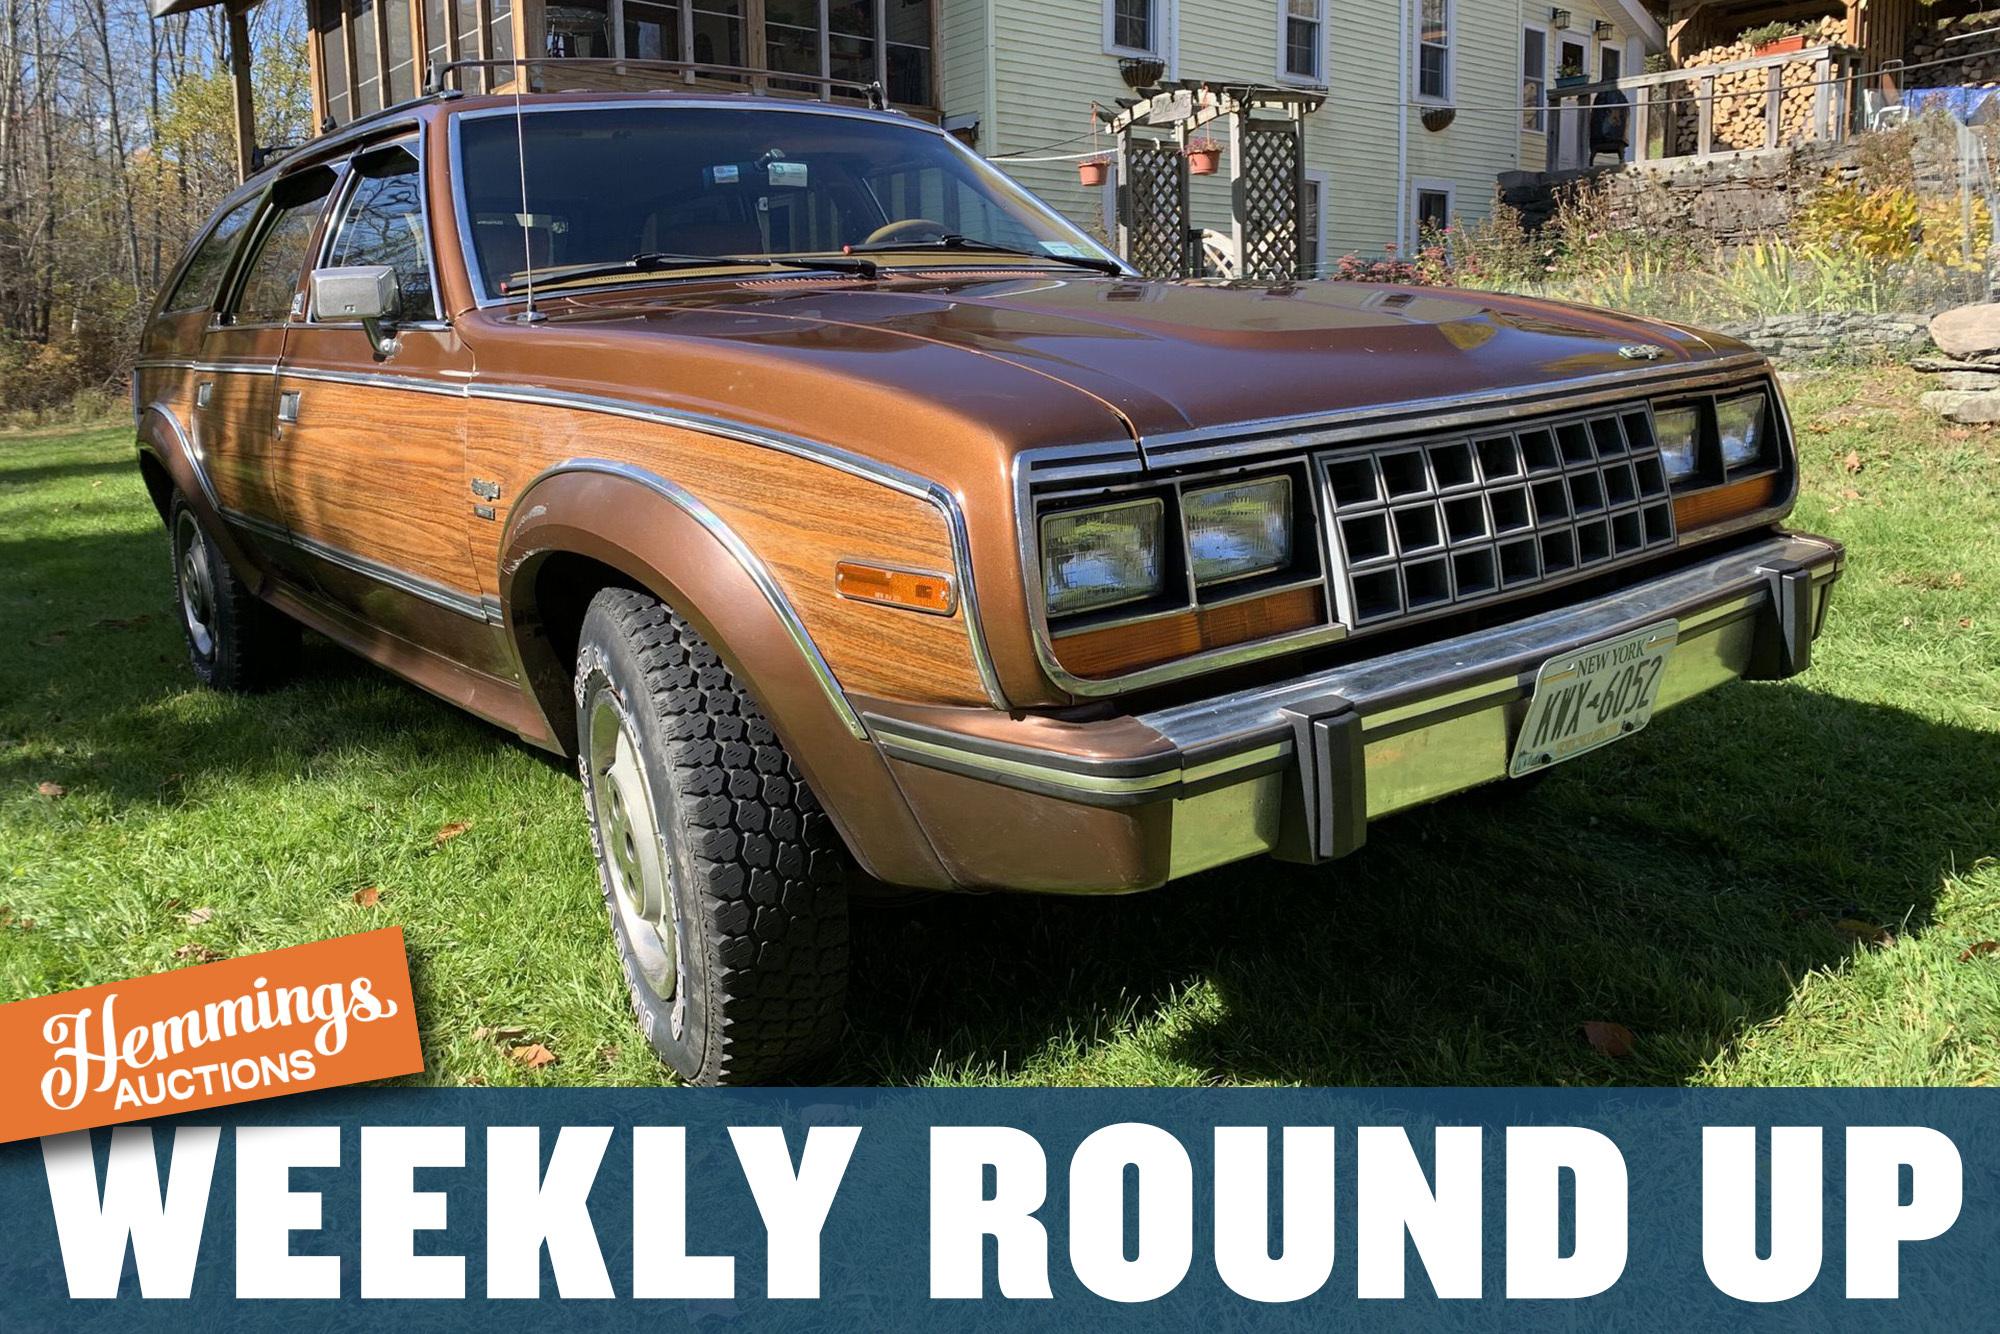 A preserved AMC Eagle 4x4 wagon, genuine Ford Fairlane Thunderbolt, and 1987 BMW M6: Hemmings Auctions Weekly Round Up for November 20-26, 2022